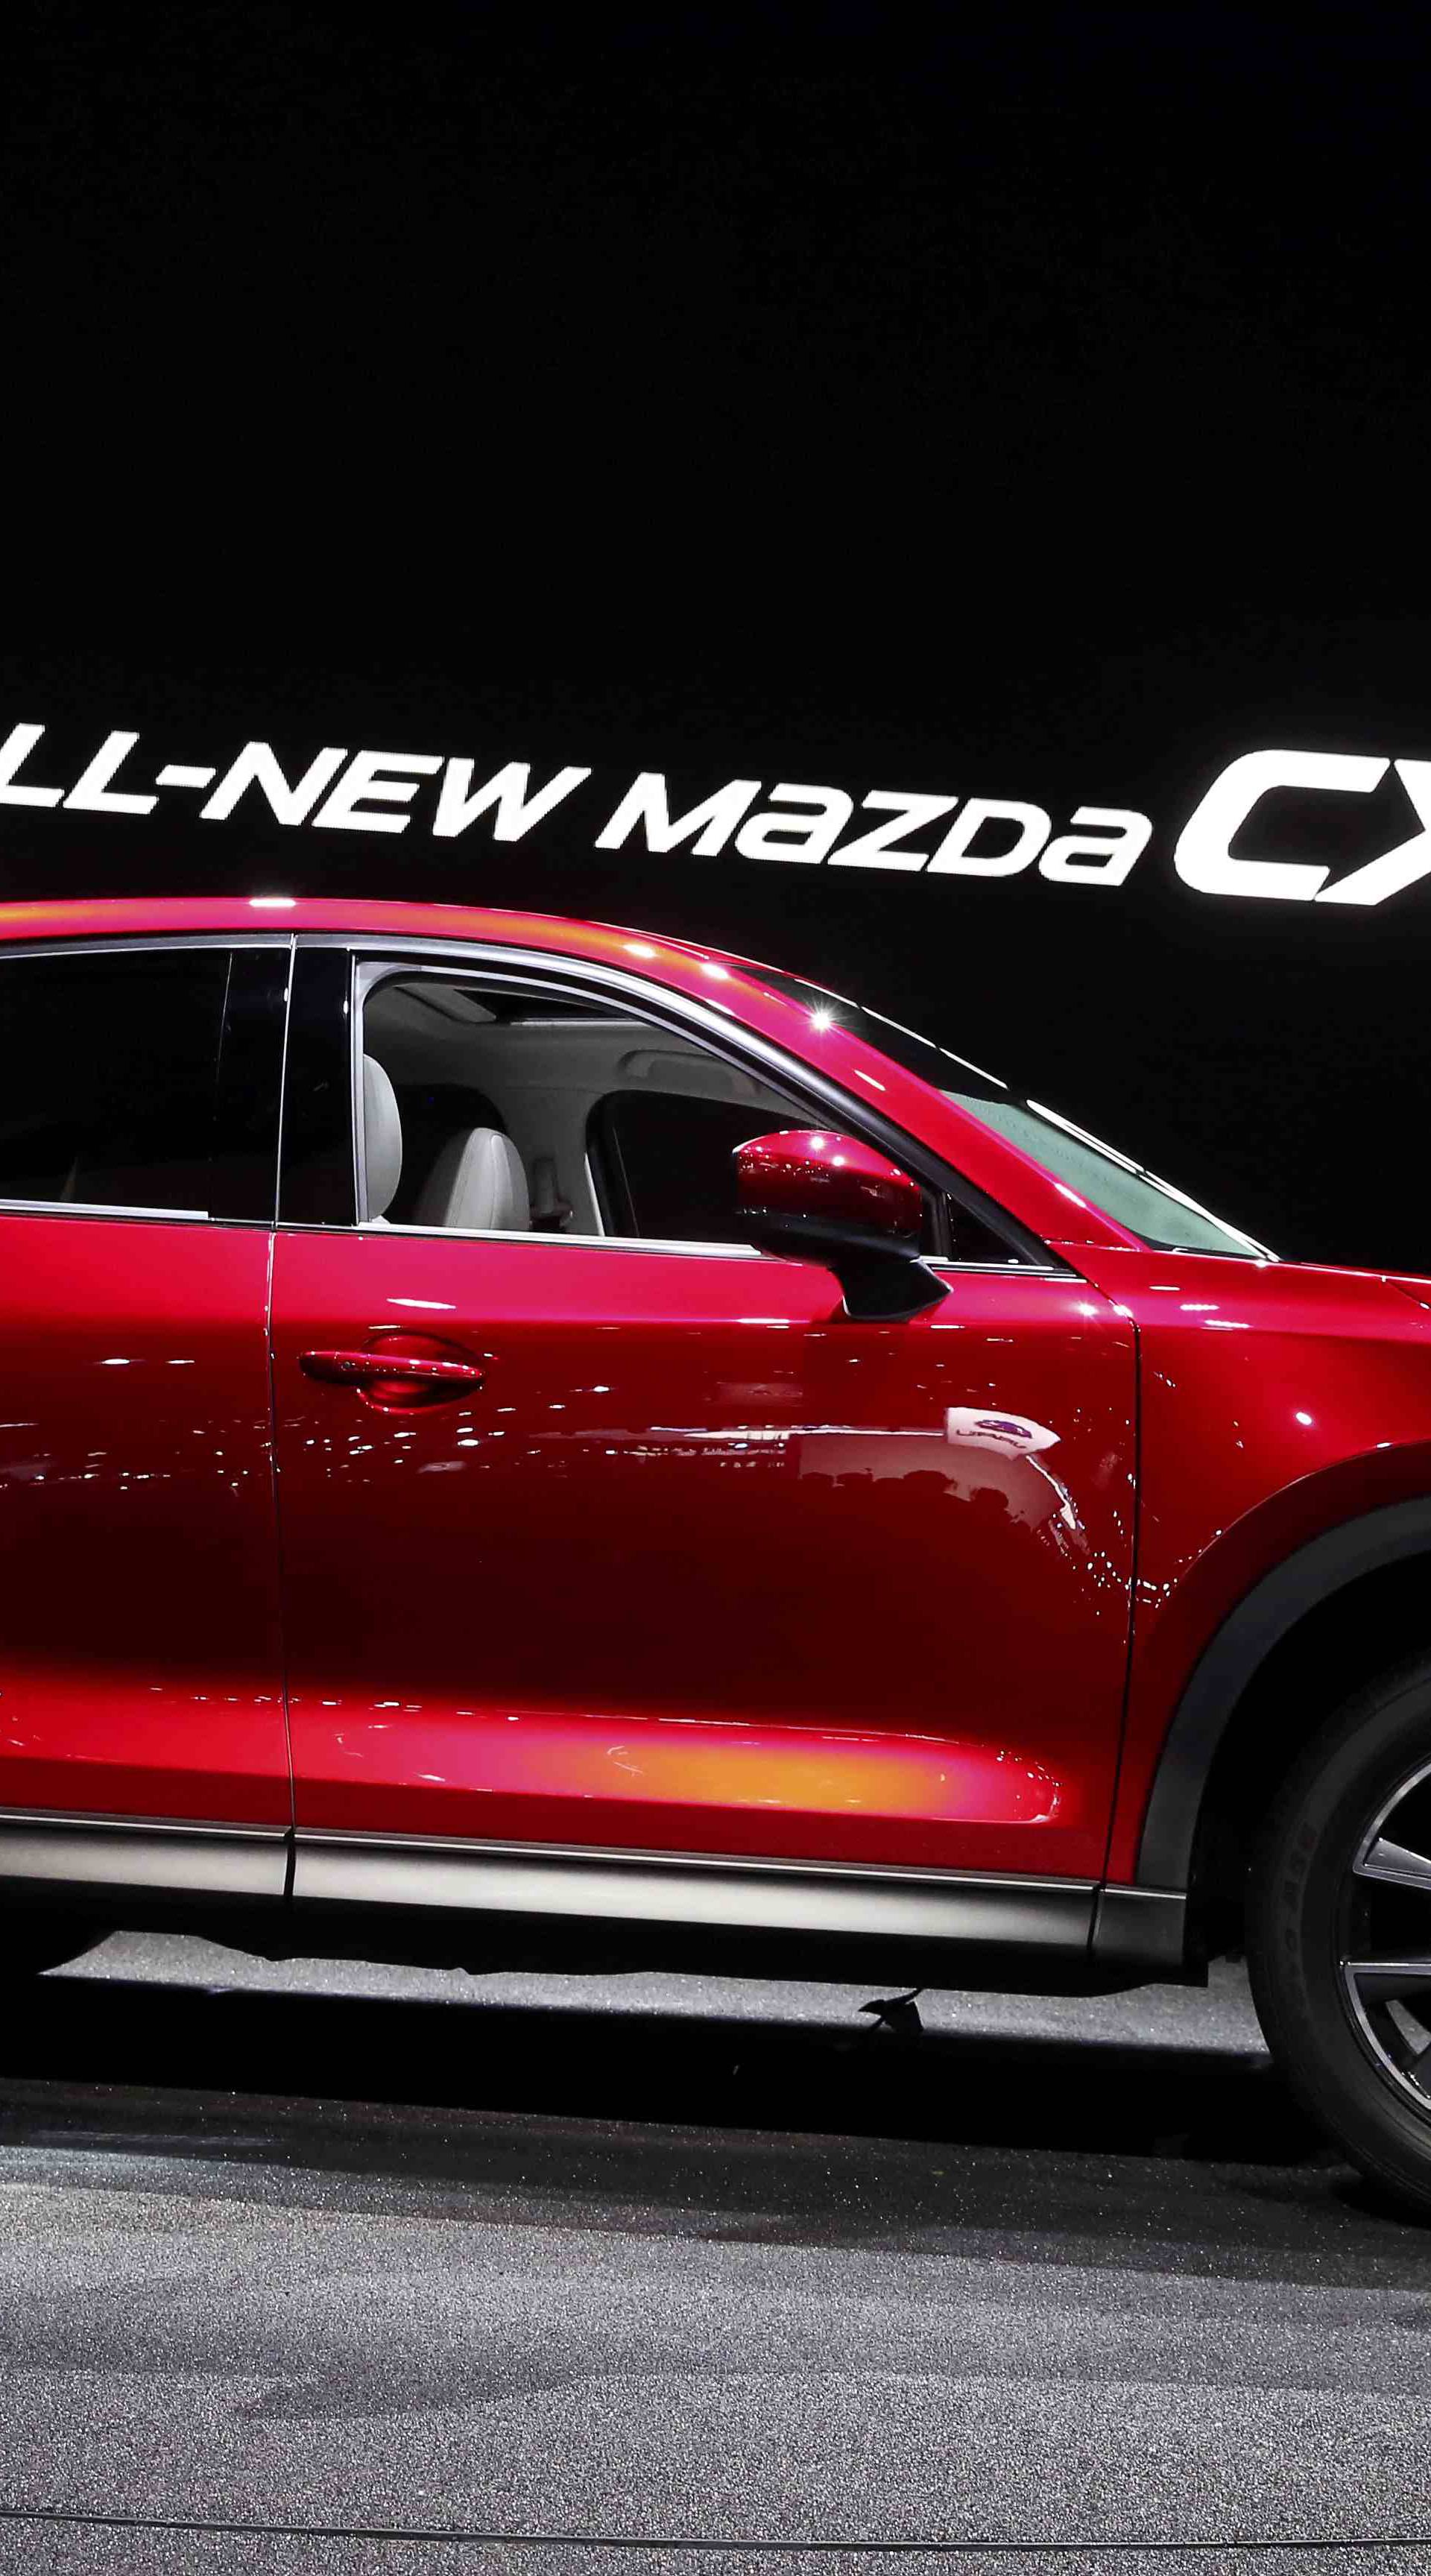 Mazda introduces the 2017 Mazda CX-5 at the 2016 Los Angeles Auto Show in Los Angeles